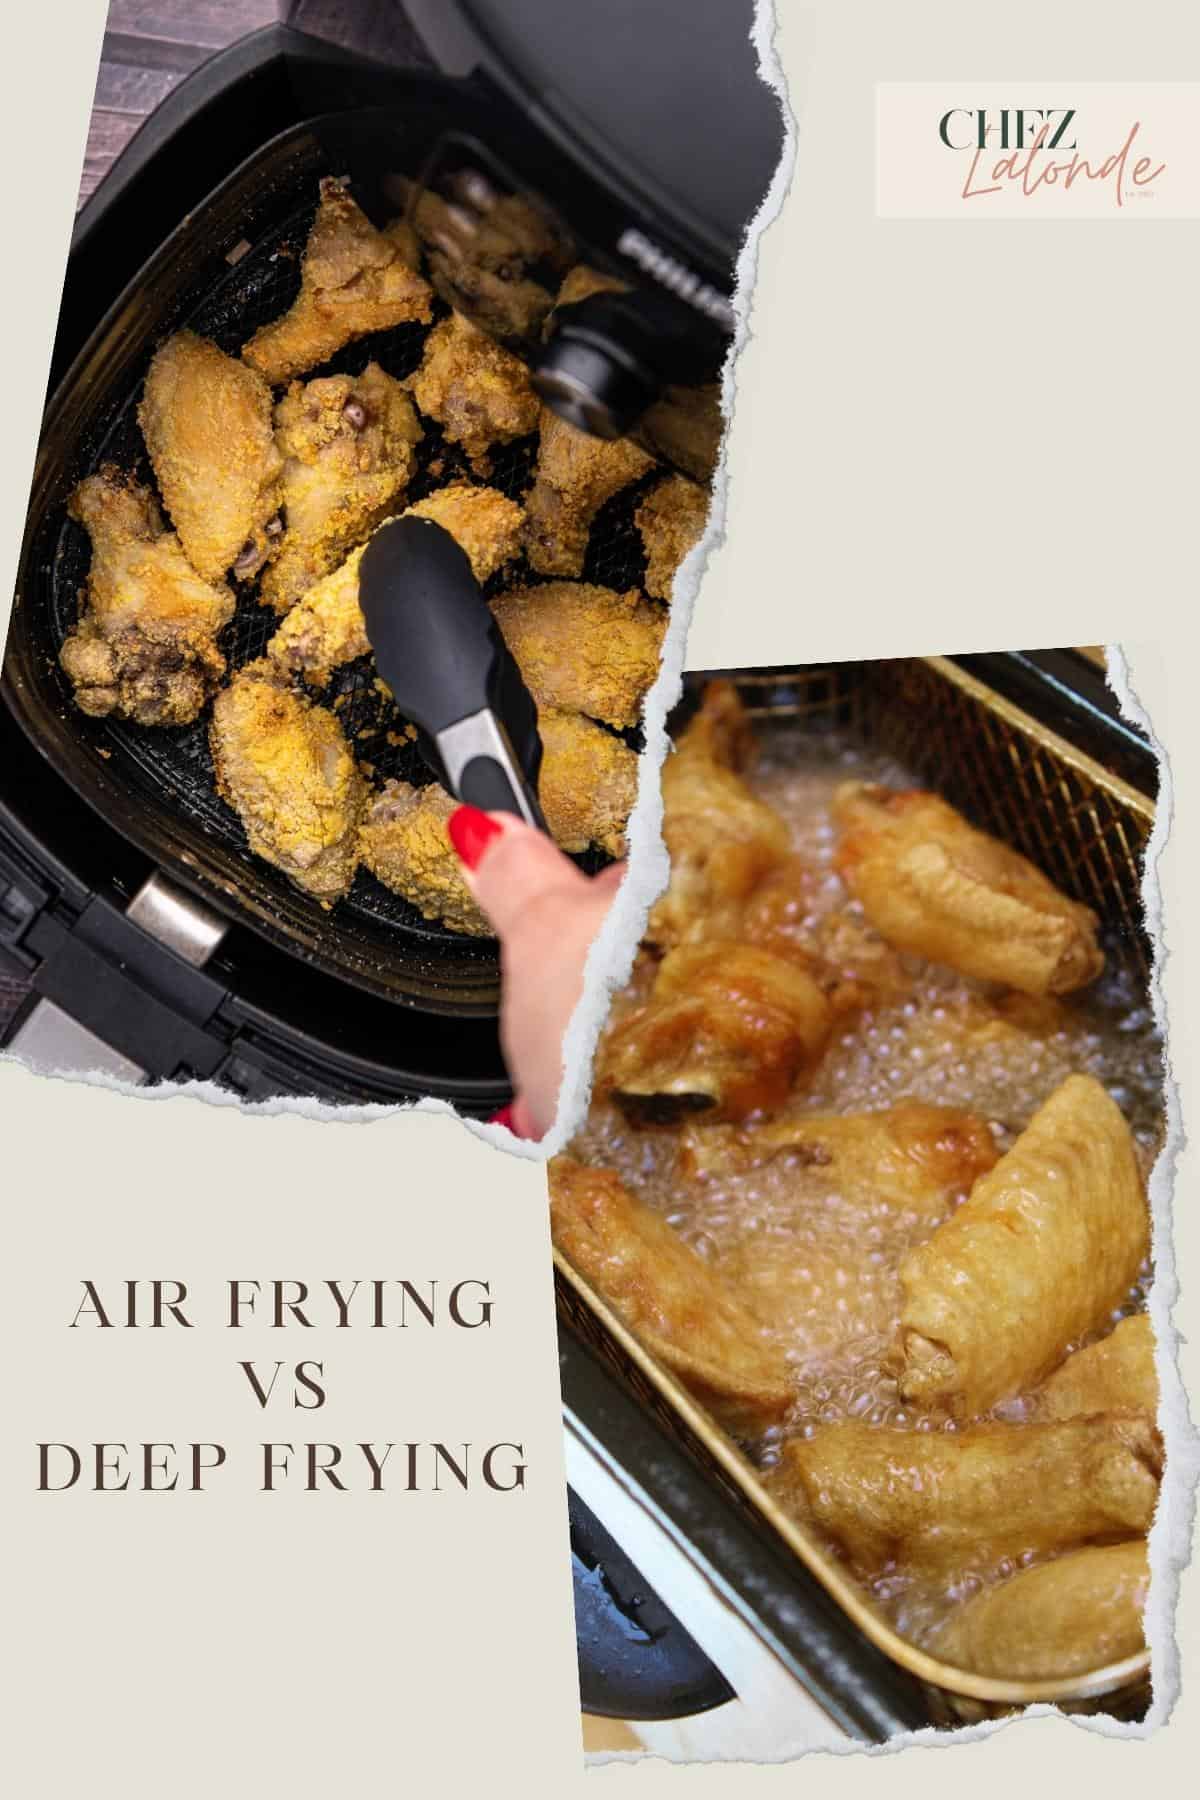 Showing my readers the differences between air frying and deep frying.